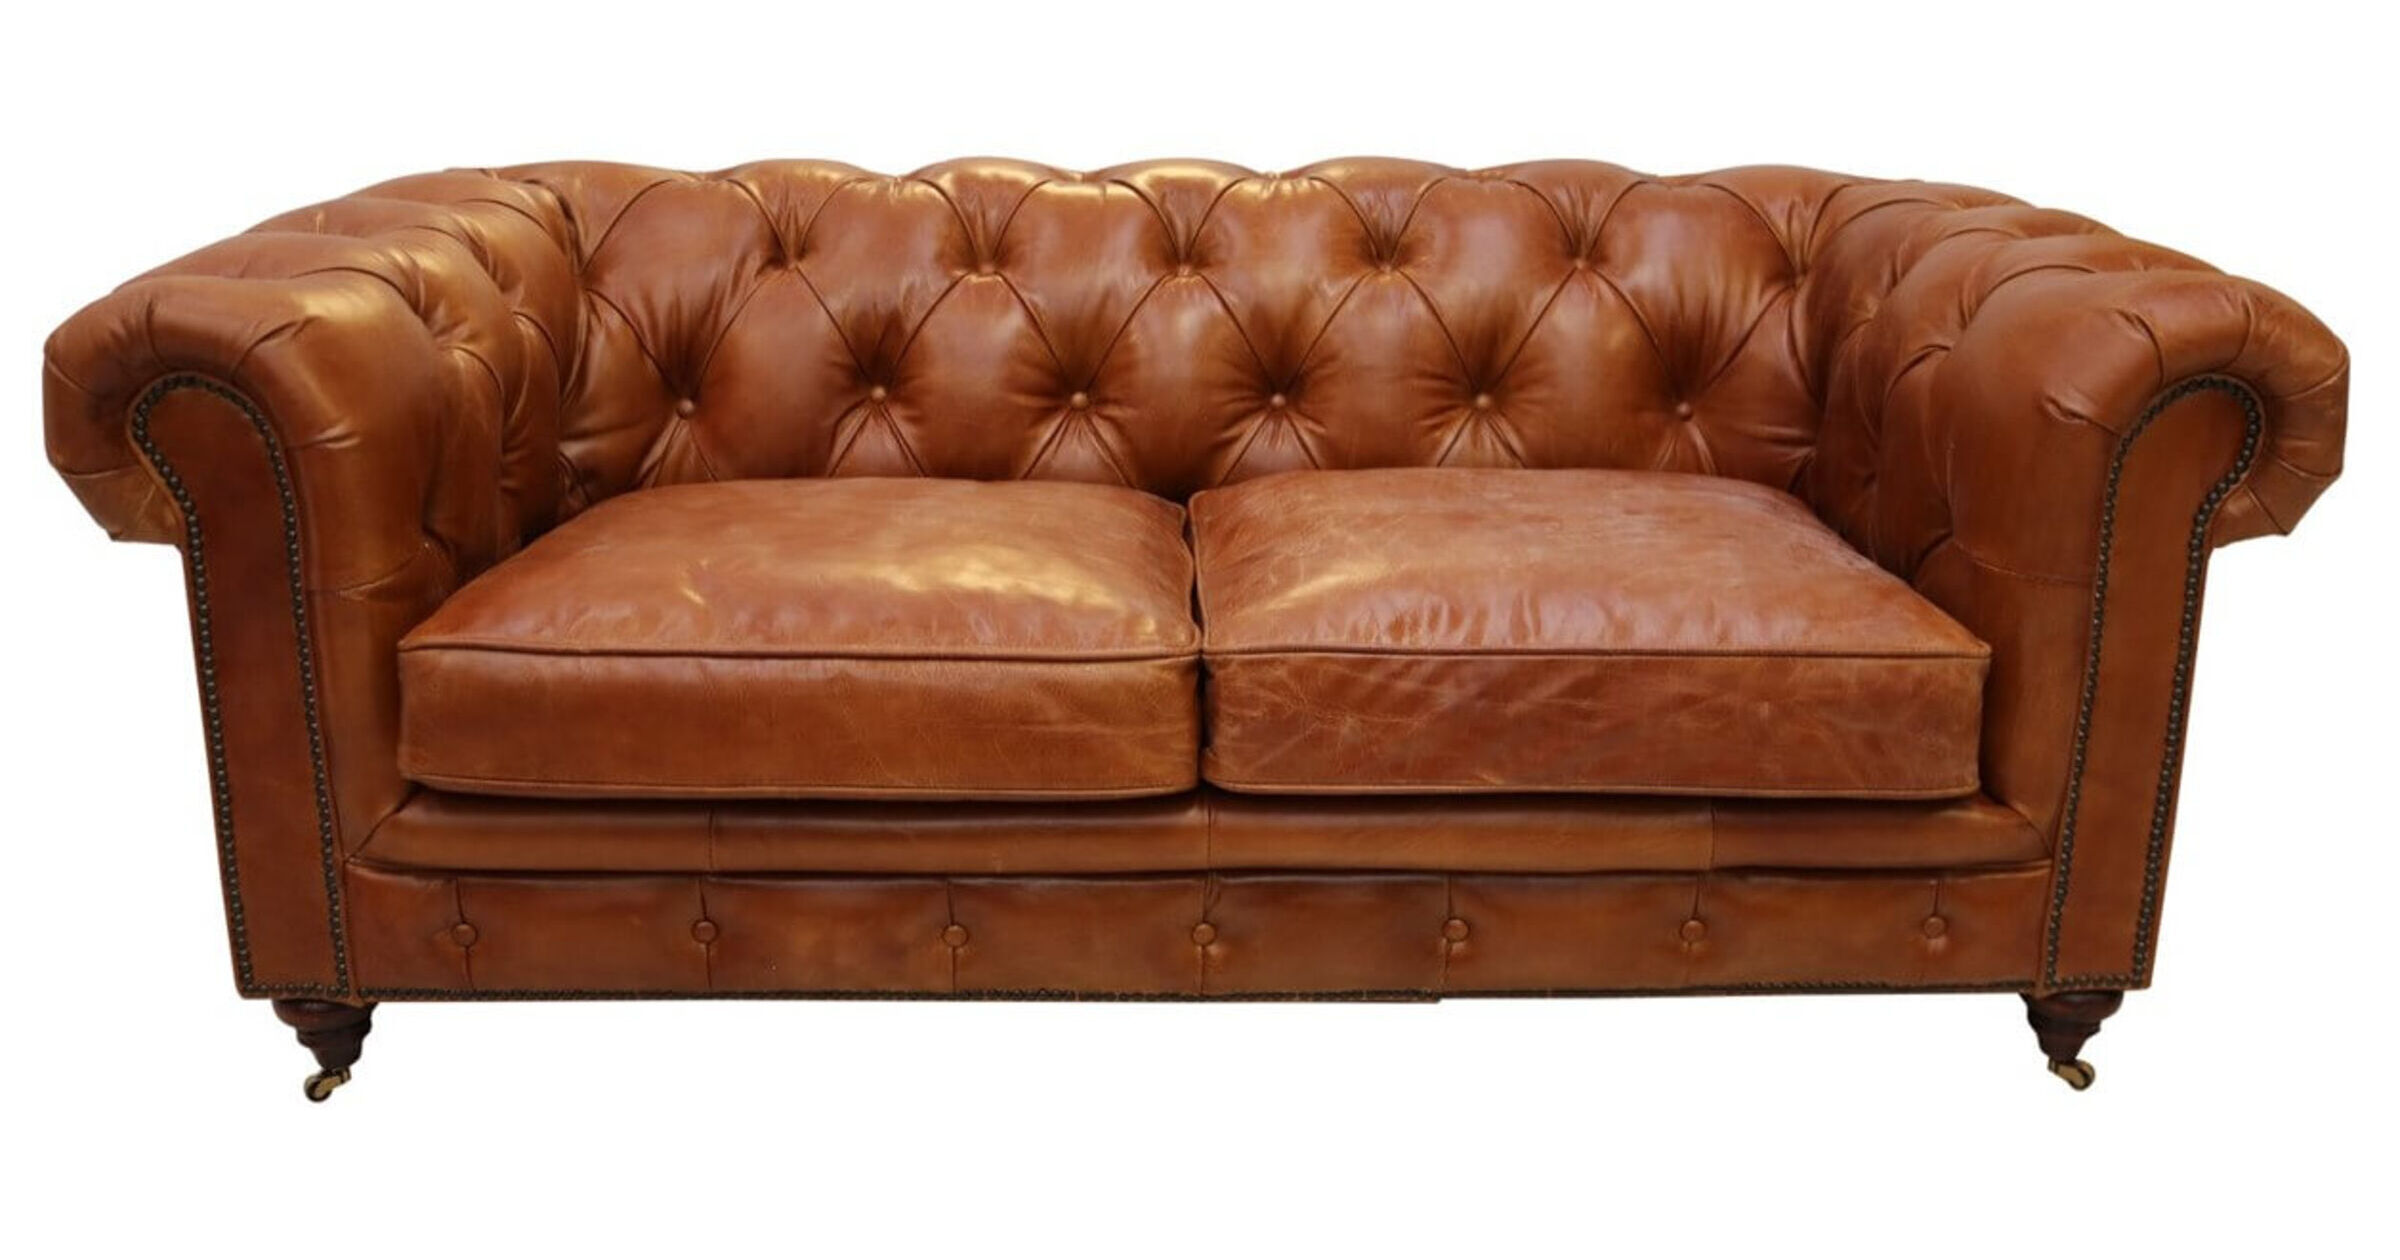 tan leather chesterfield sofa sale